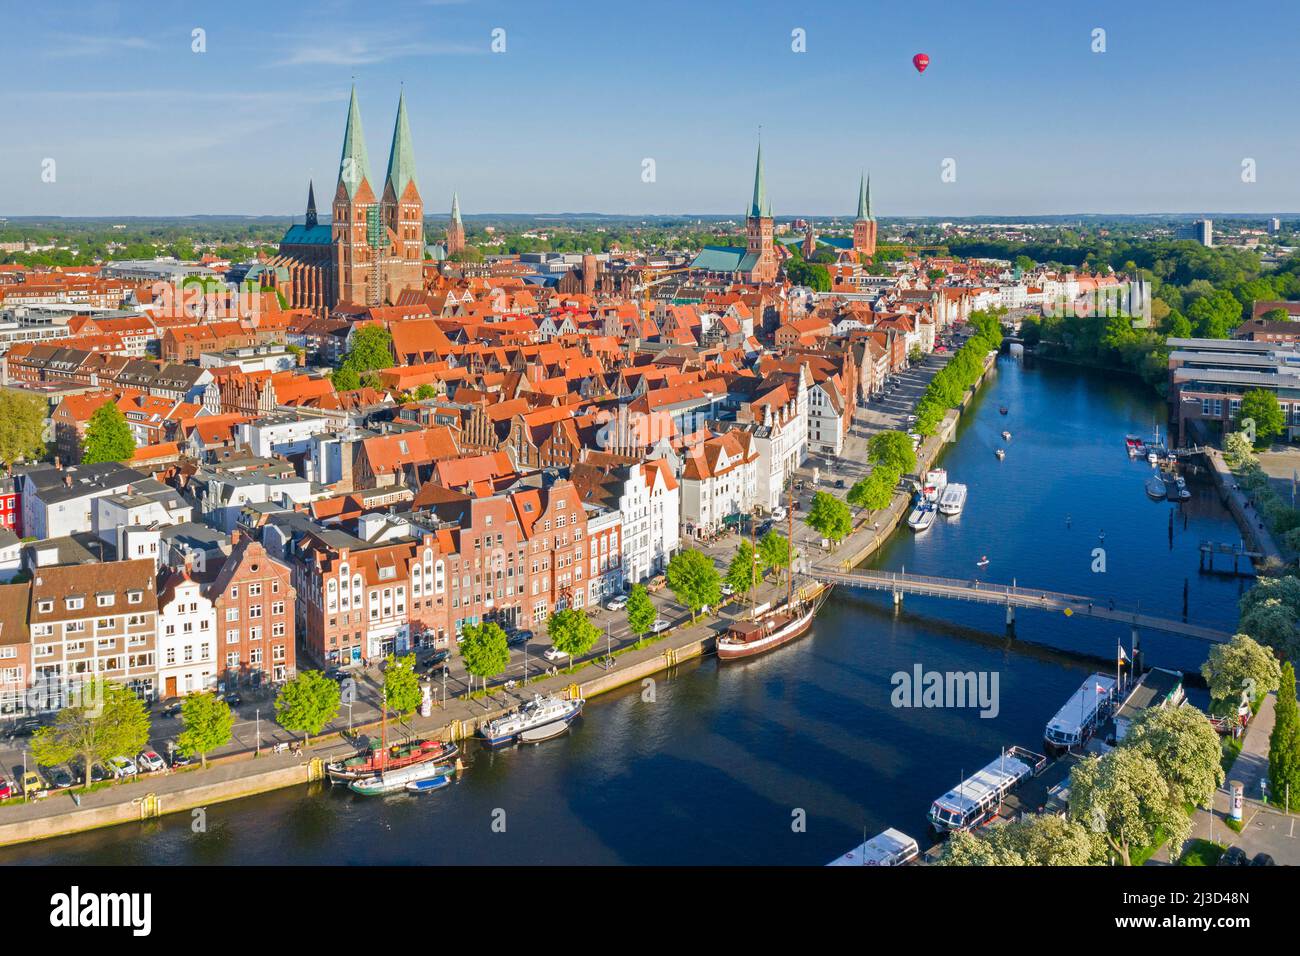 Aerial view over the river Trave and old sailing ships and boats in the old town of the Hanseatic City of Lübeck, Schleswig-Holstein, Germany Stock Photo